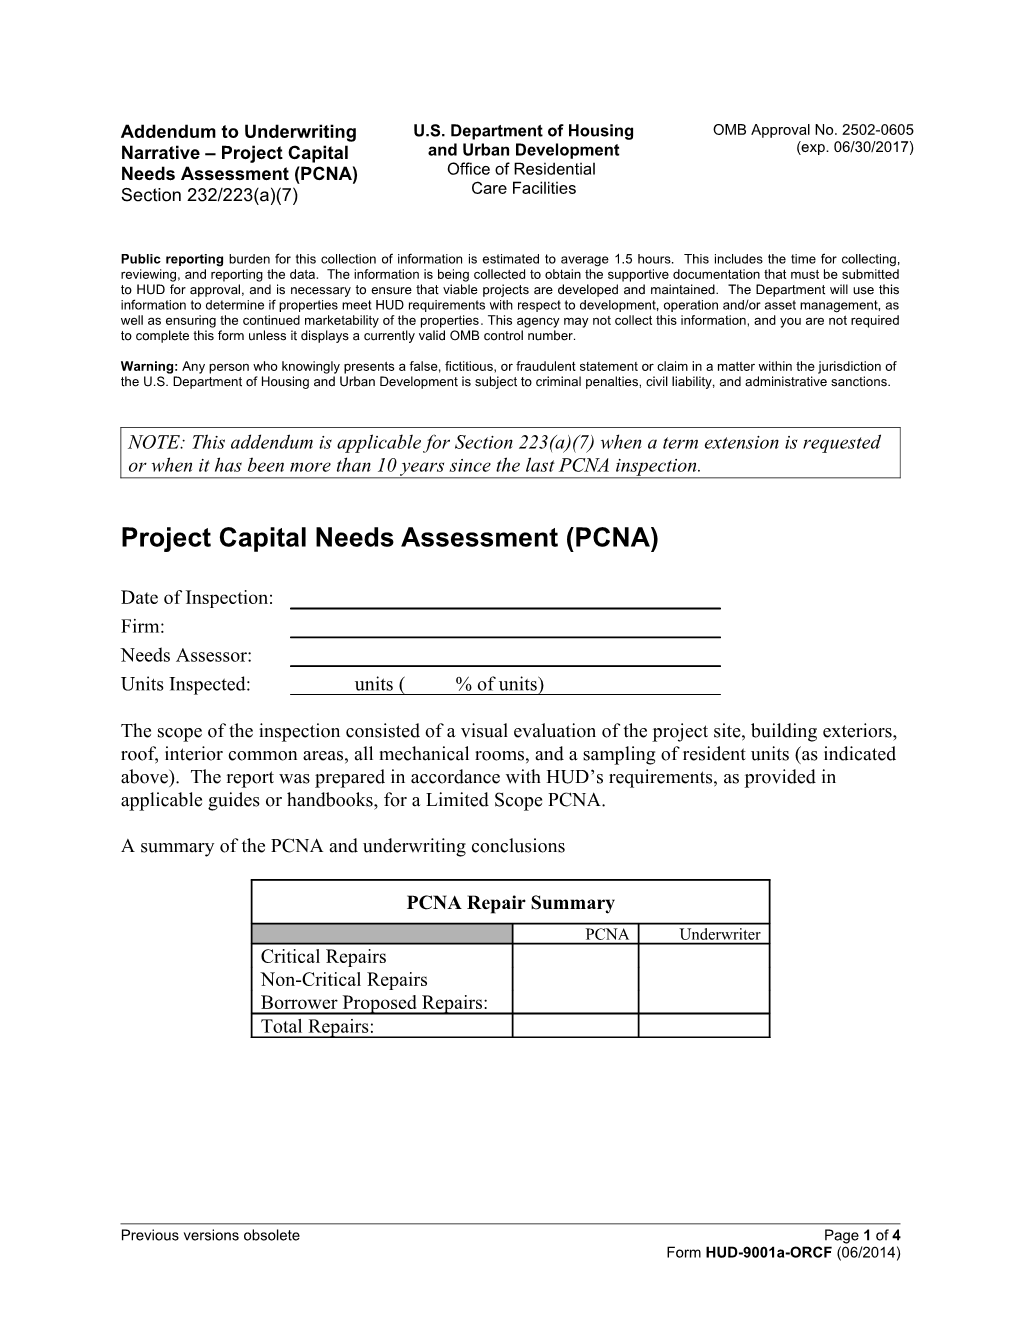 Addendum to Underwriting Narrative Project Capital Needs Assessment (PCNA) Section